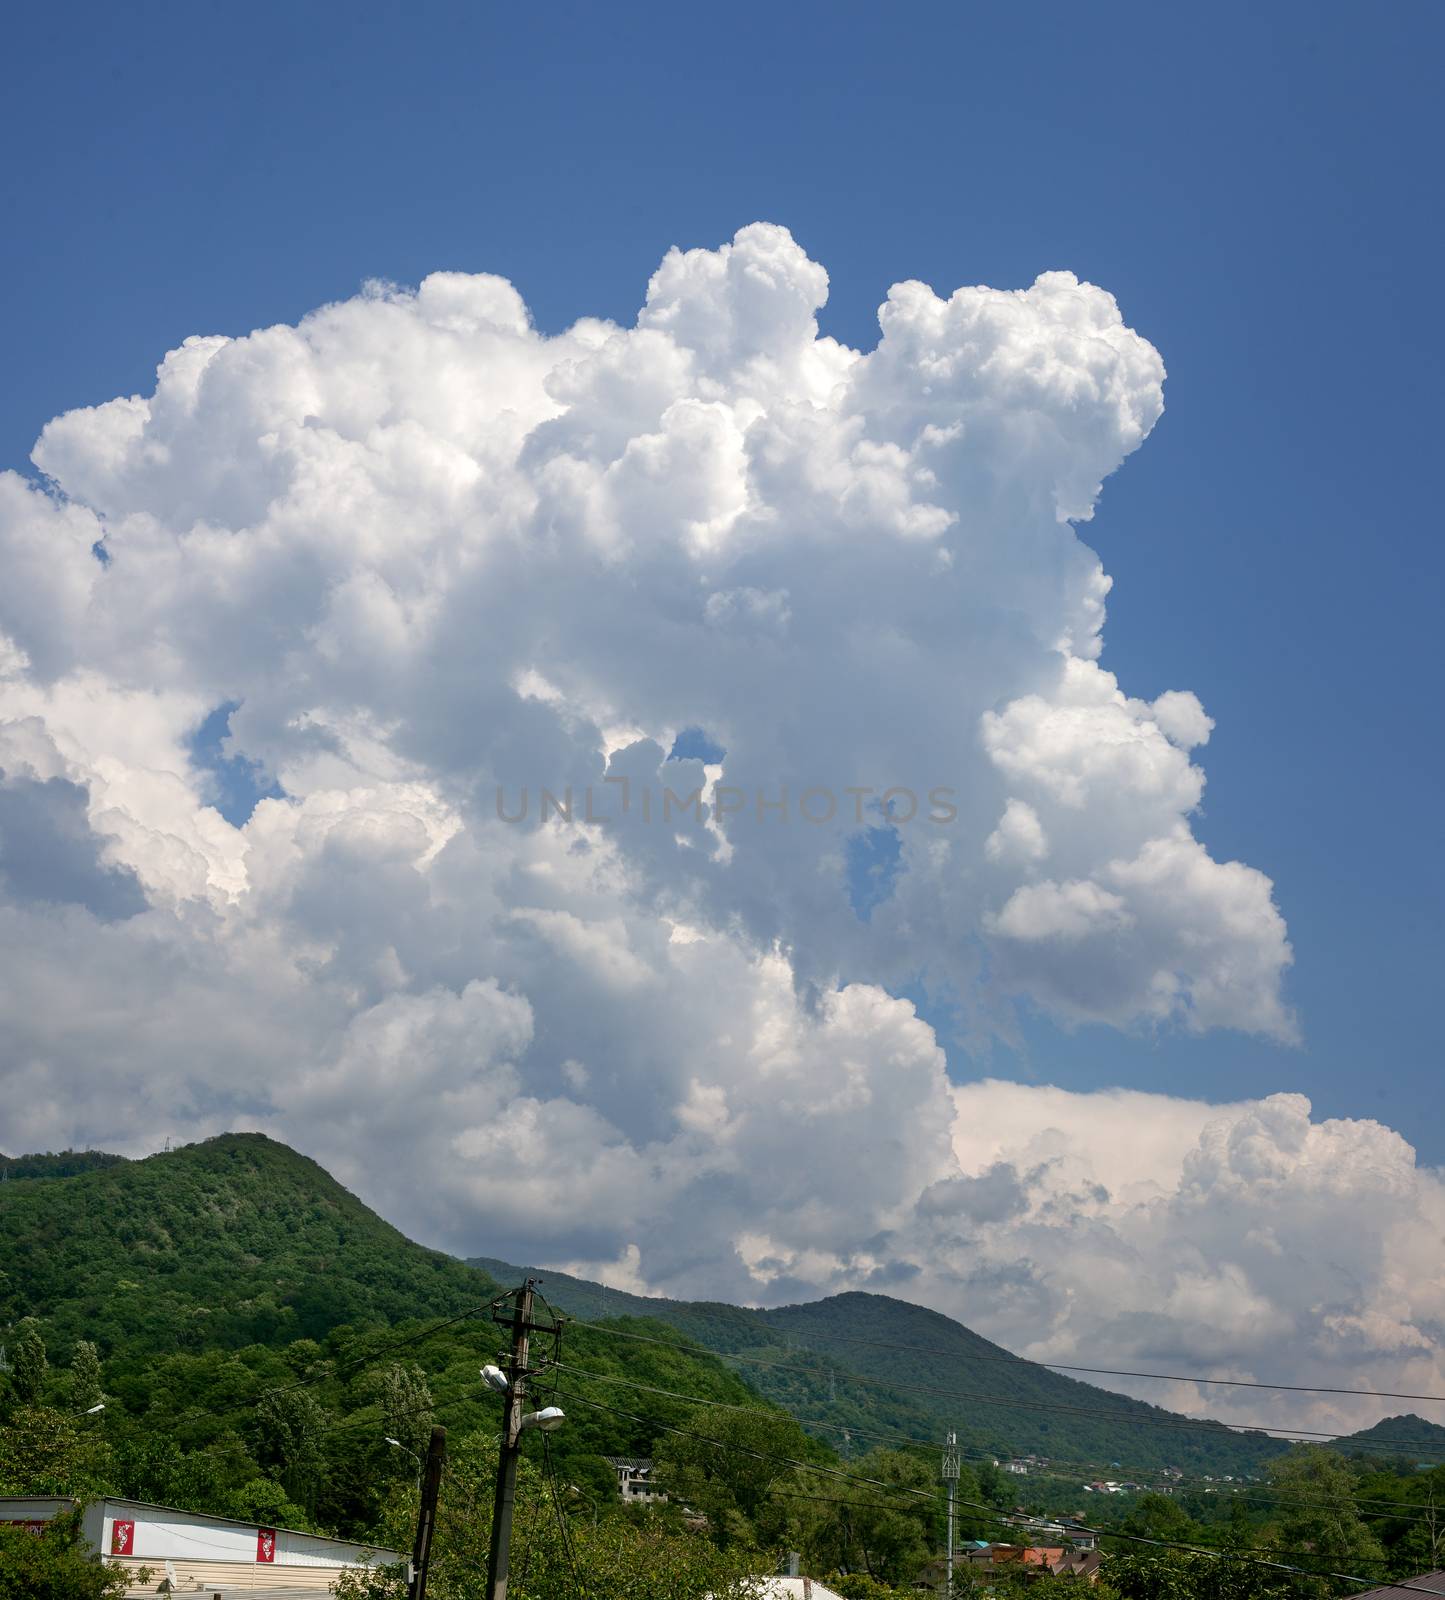 Big cloud above mountains by Angorius